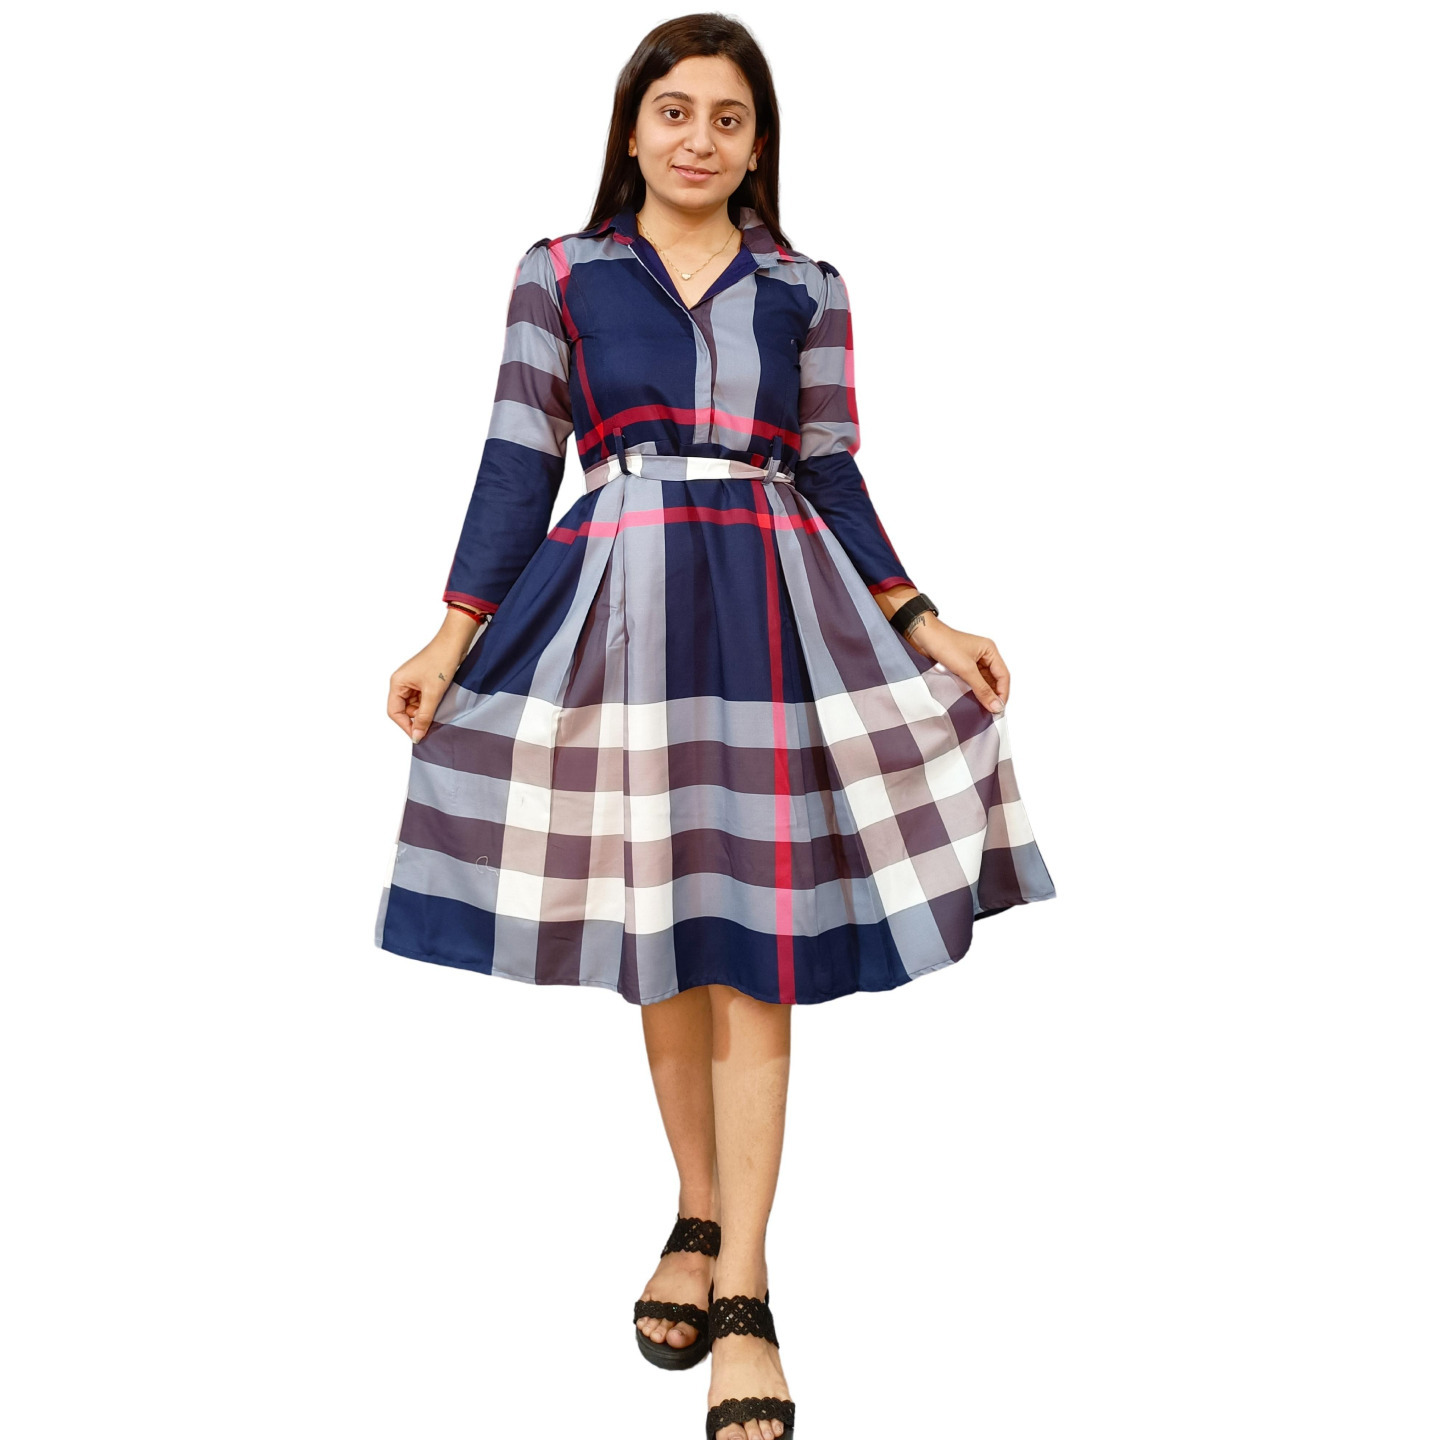 Wowsome Wish Fit & Flared Printed Multi Check Dress